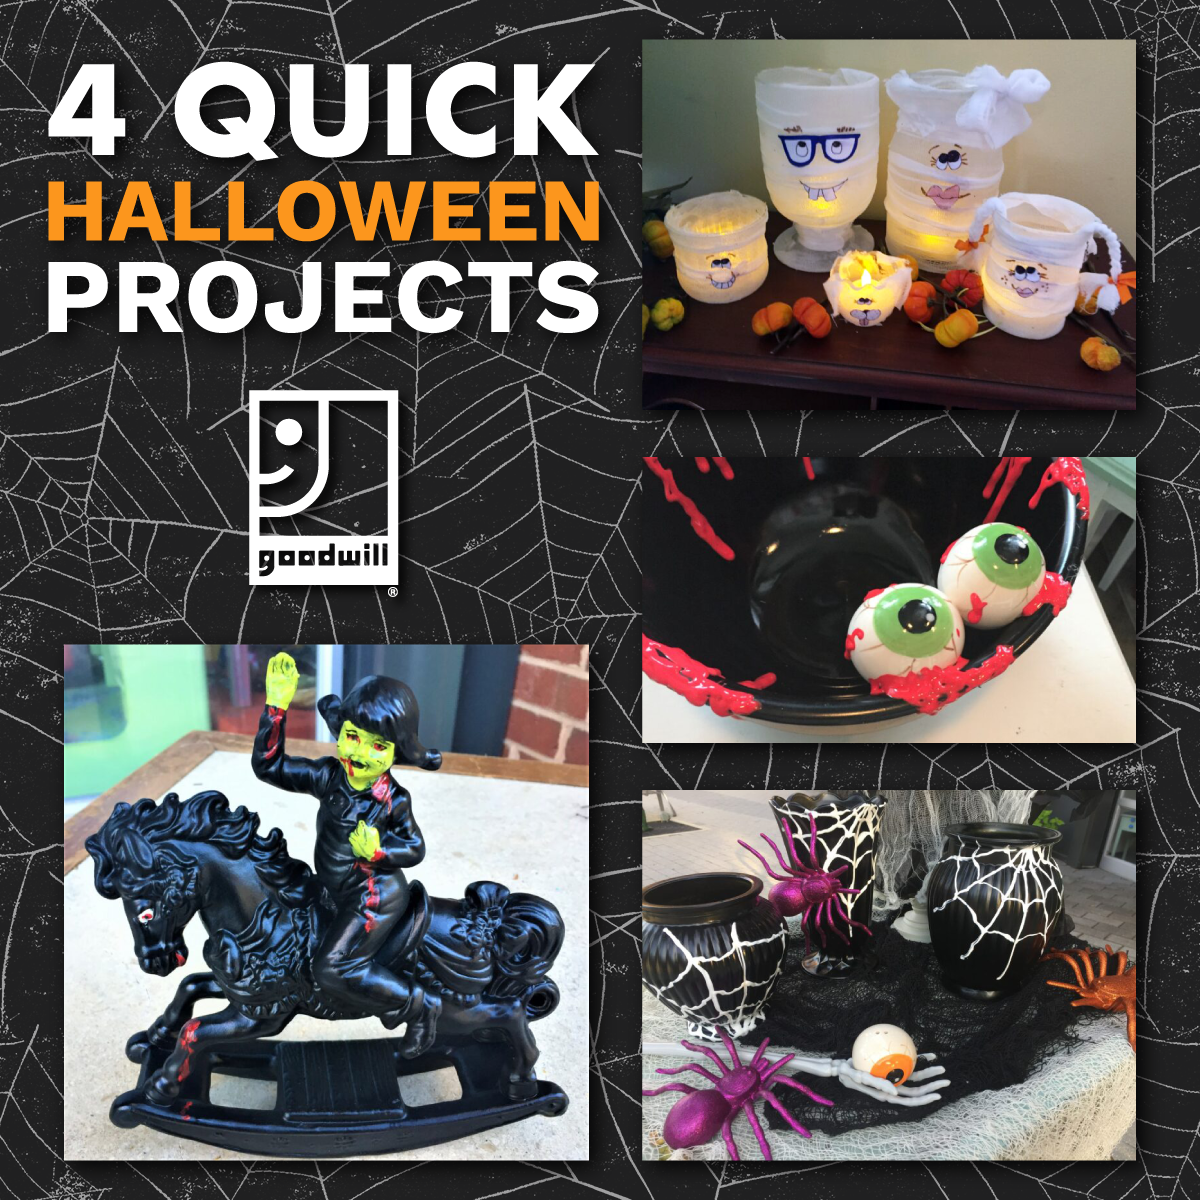 Four Quick Projects to Scare Up Some Halloween Fun